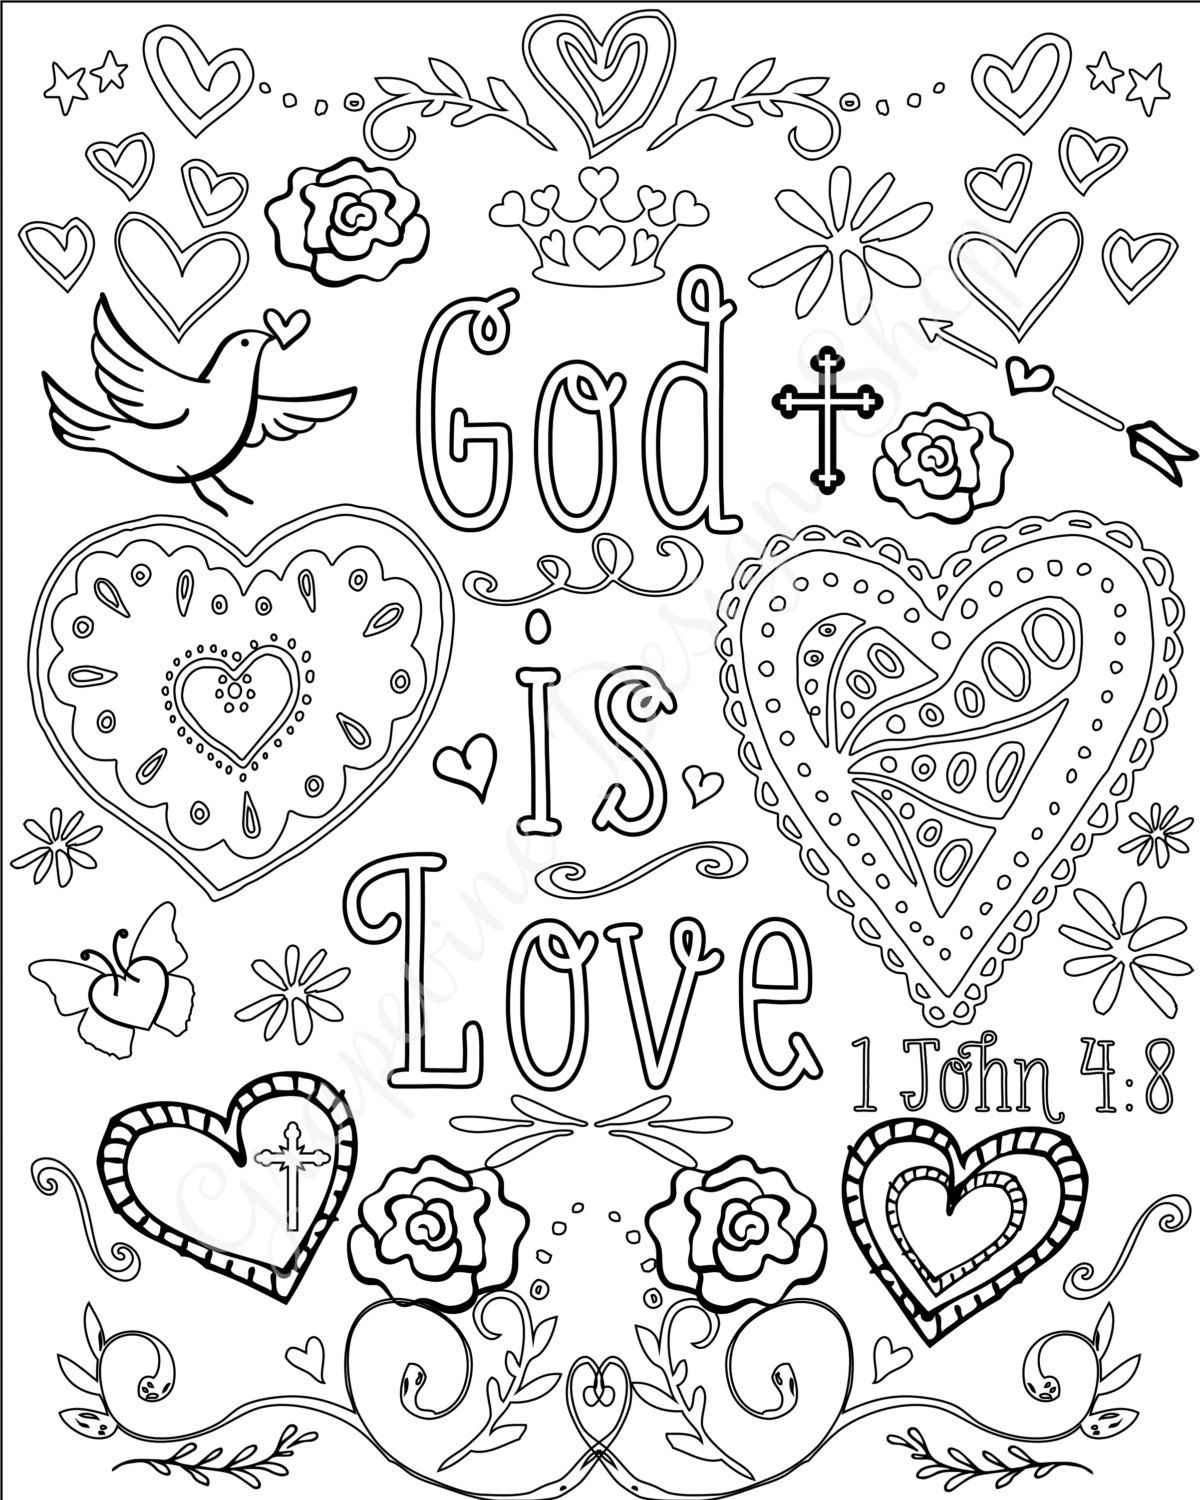 Bible Verse Coloring Pages Scripture Coloring Pages Set of - Etsy | Pagine  da colorare per adulti, Bambini bibbia, Pagine da colorare per bambini